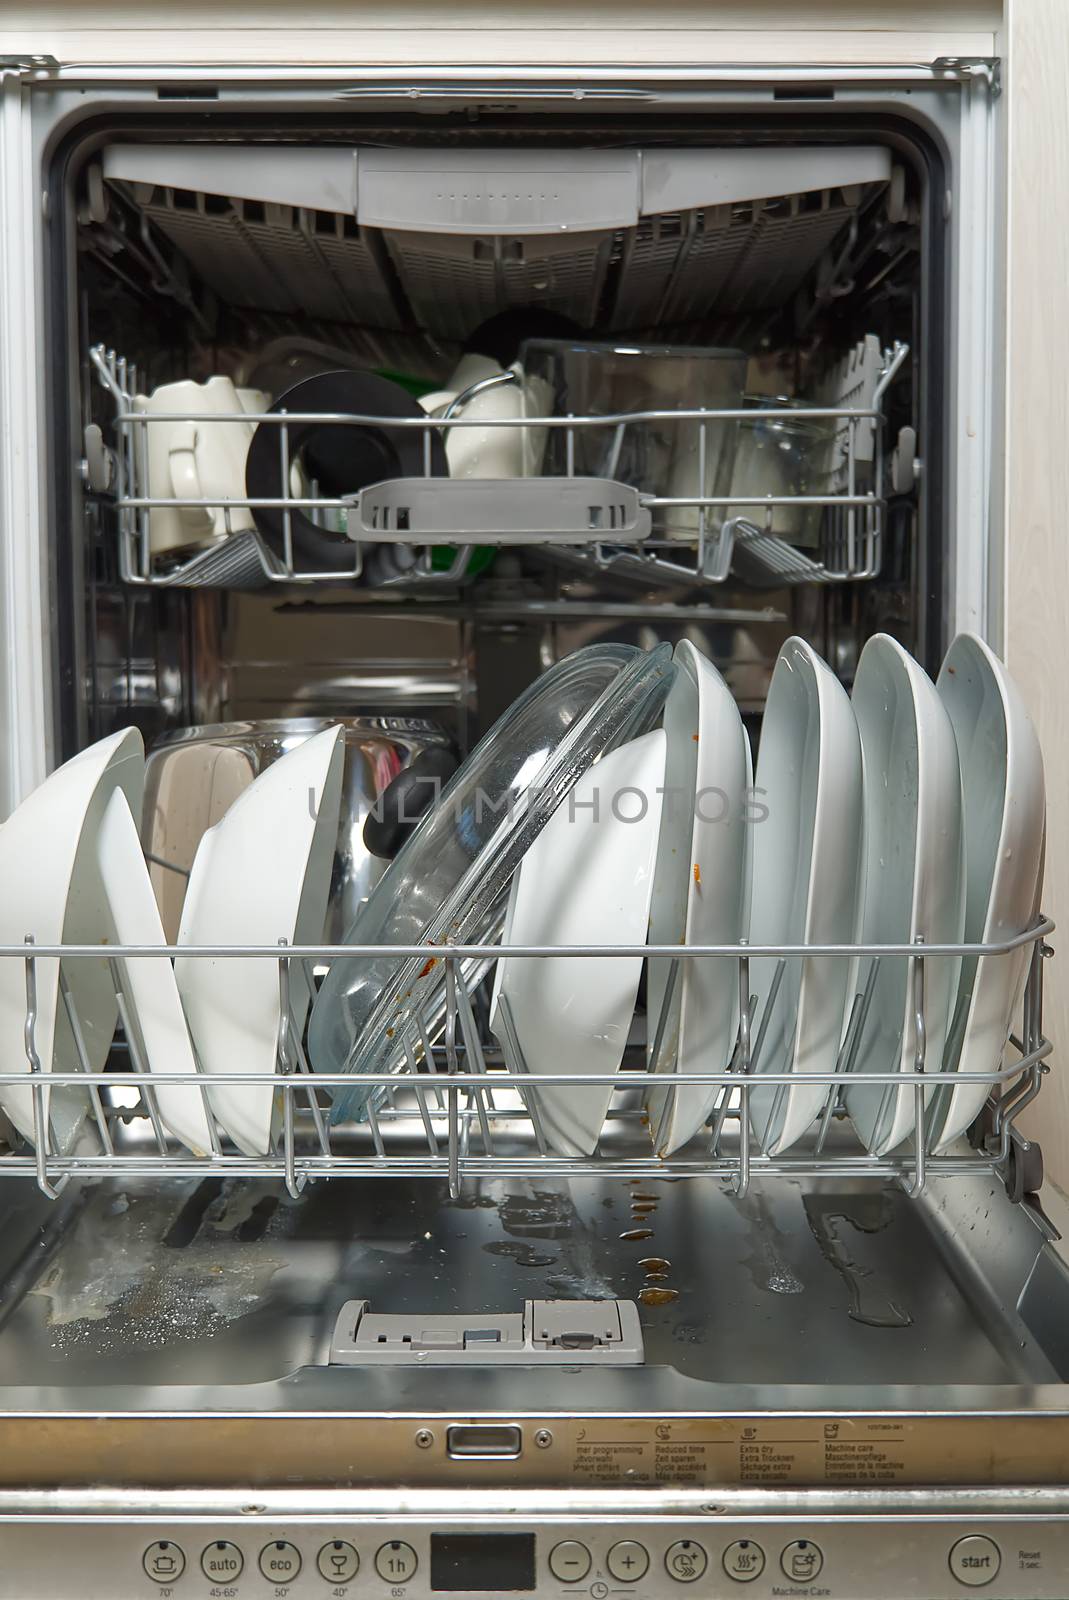 Dirty dish in open integrated dishwasher. full loaded dishwasher ready for washing. Open dishwasher with dirty dishes inside before washing.